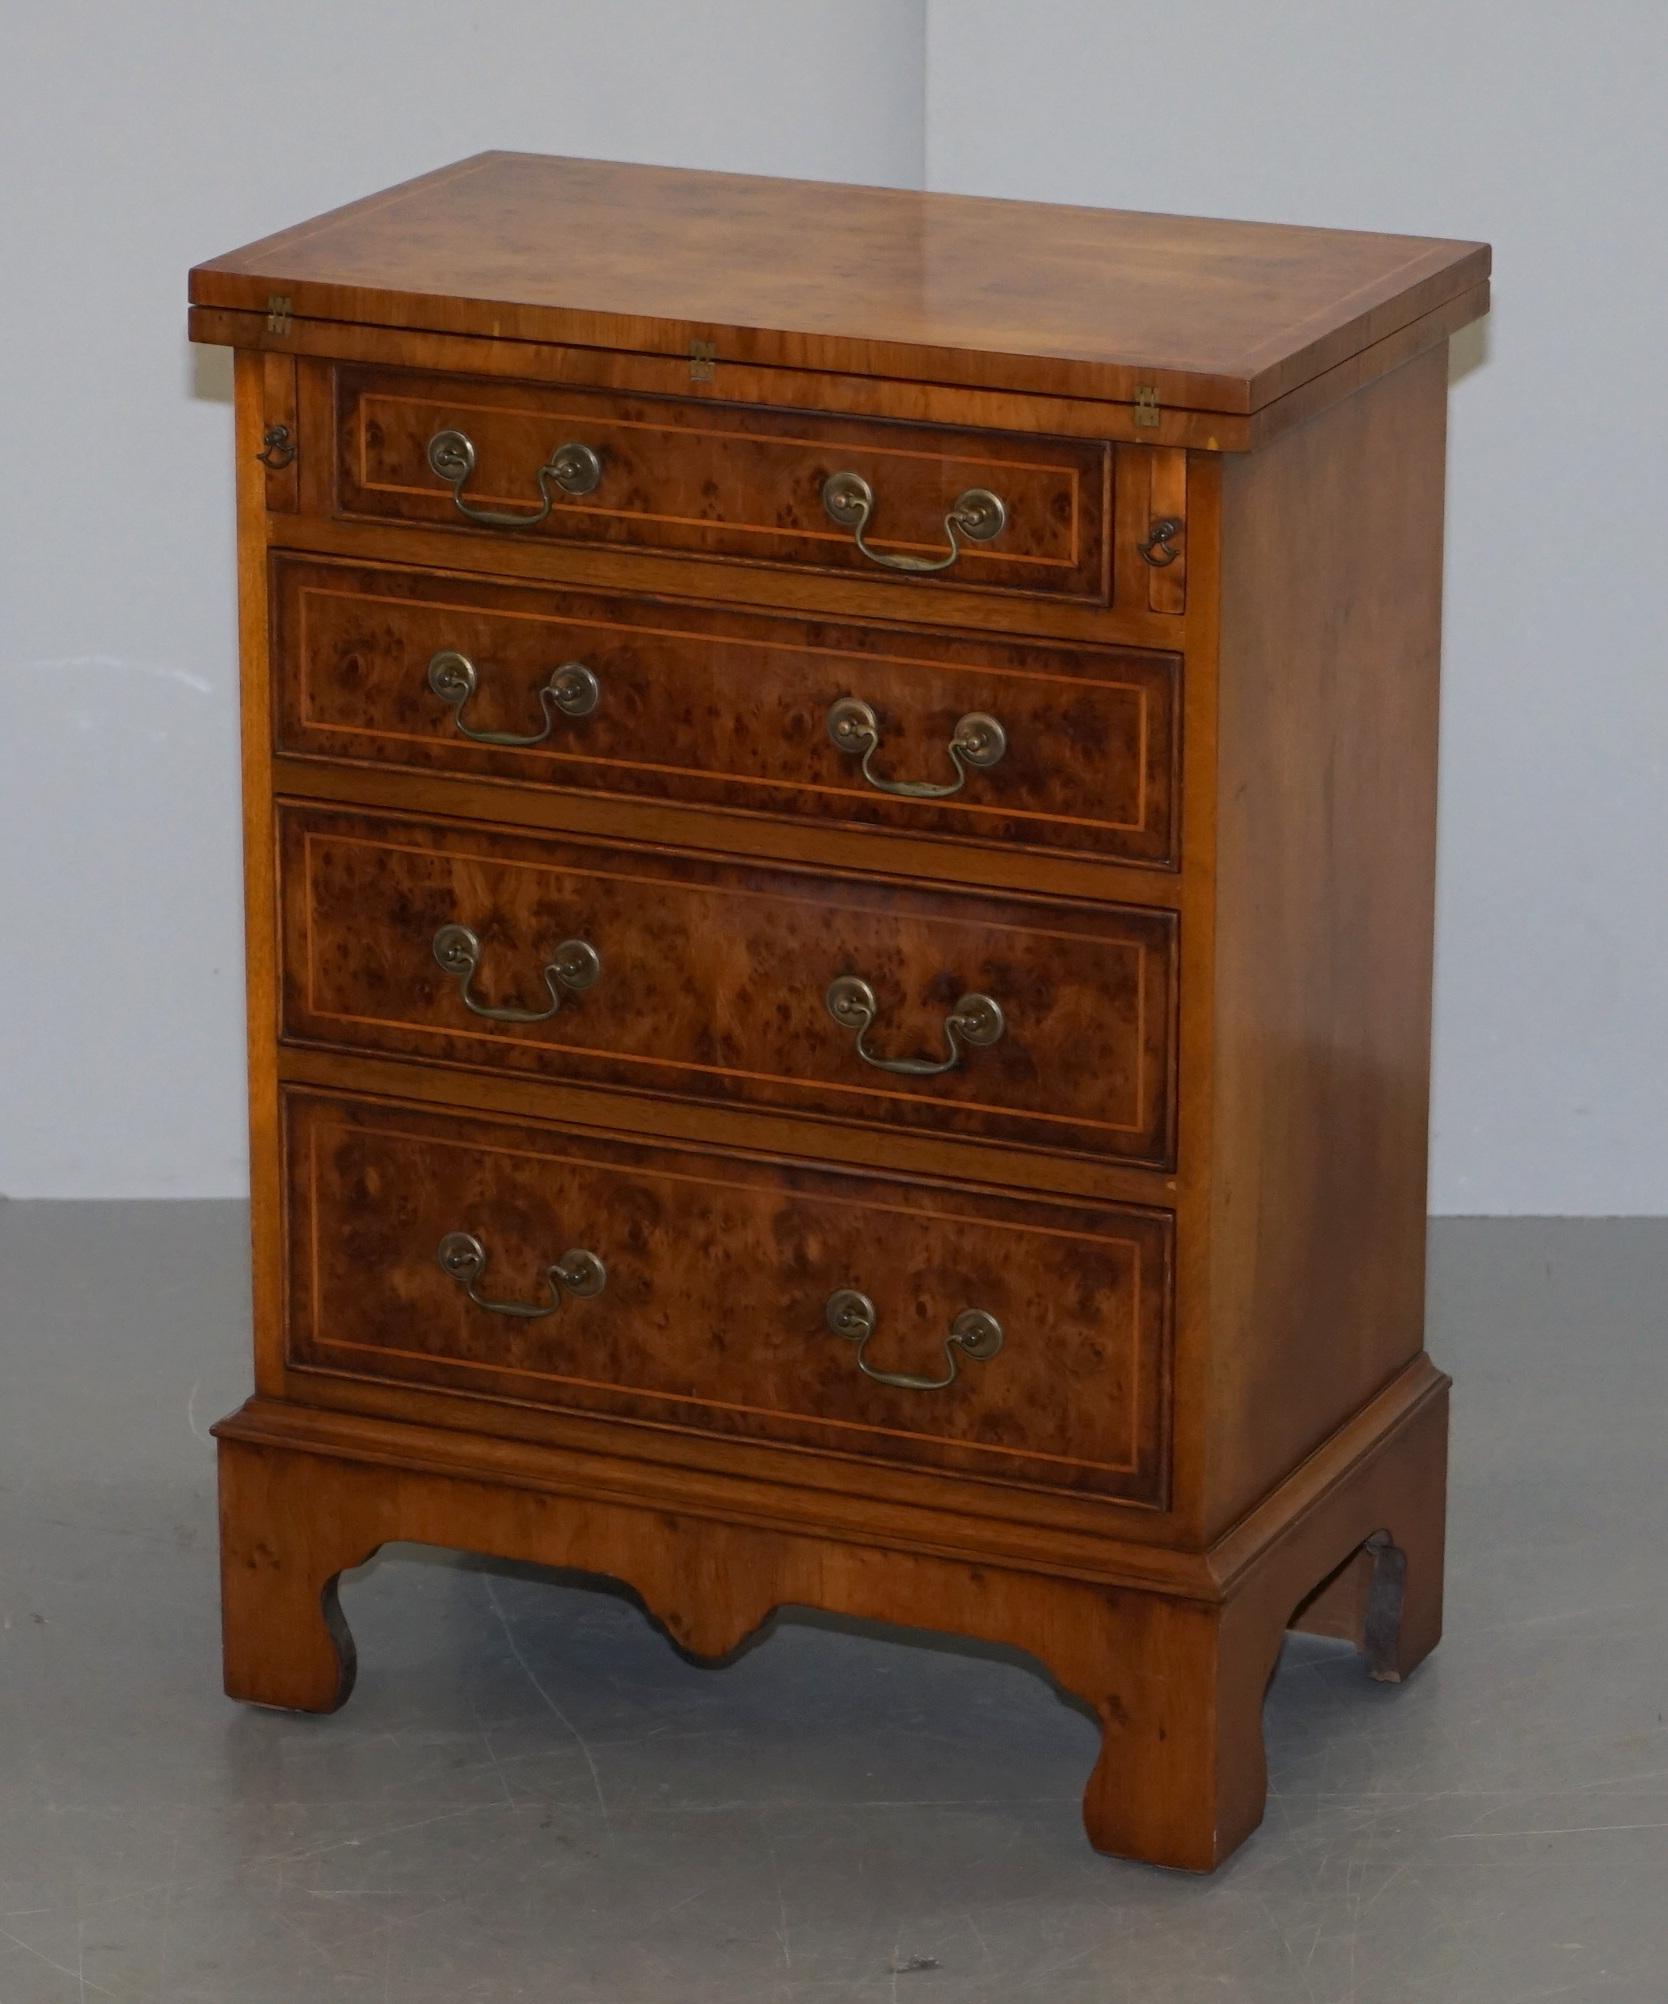 Victorian Sublime Burr Walnut Side Table Sized Chest of Drawers with Butlers Serving Tray